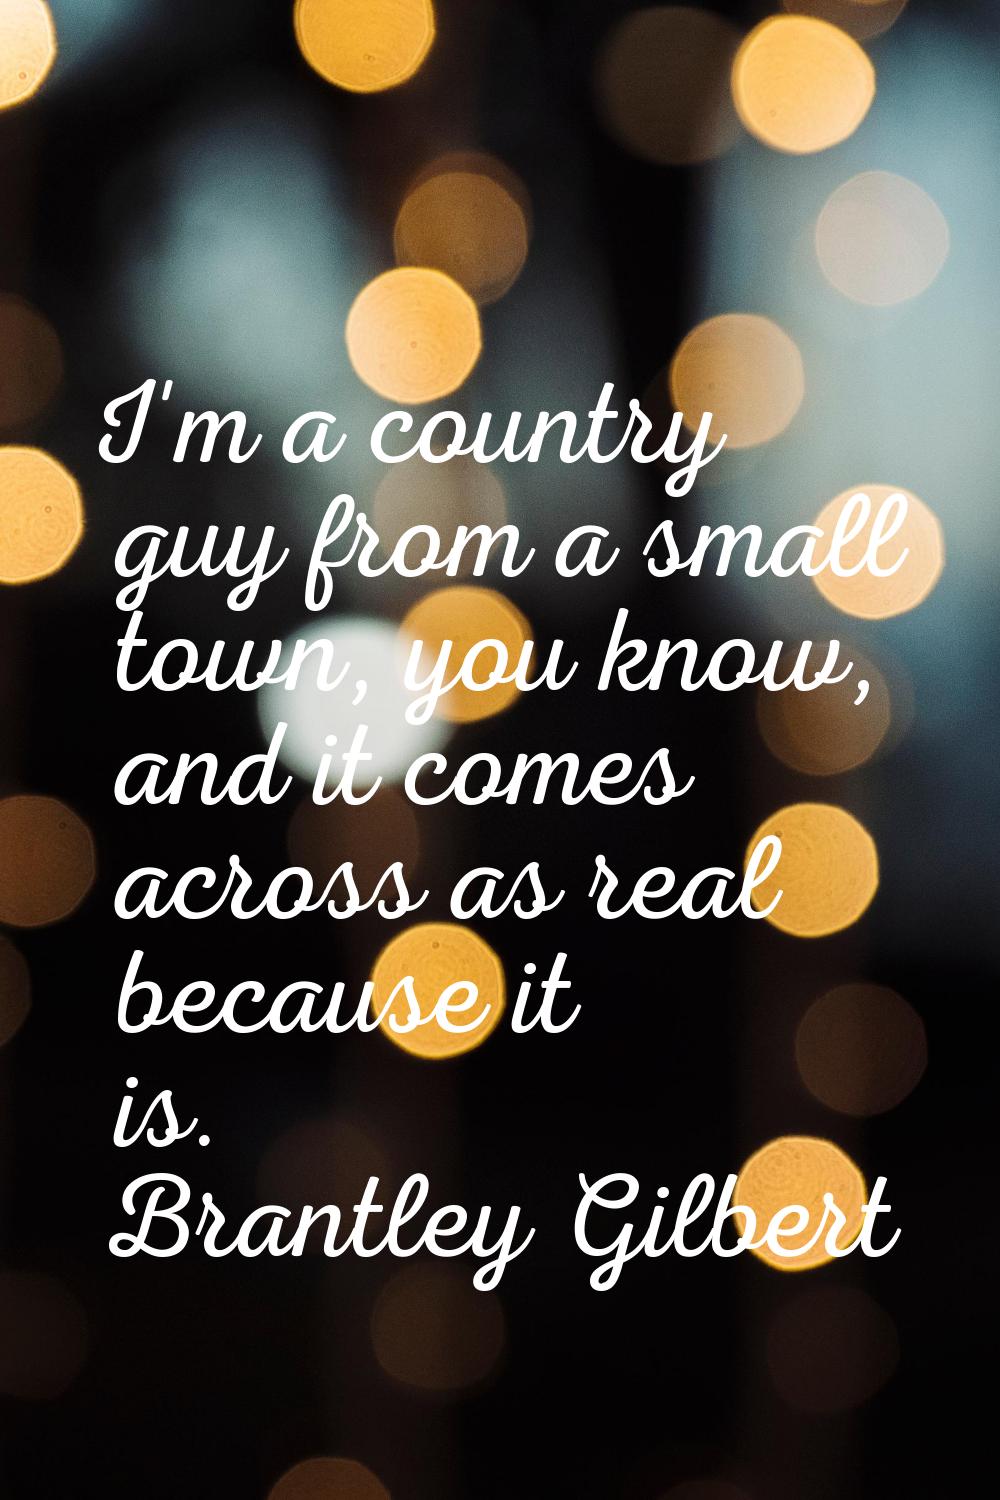 I'm a country guy from a small town, you know, and it comes across as real because it is.